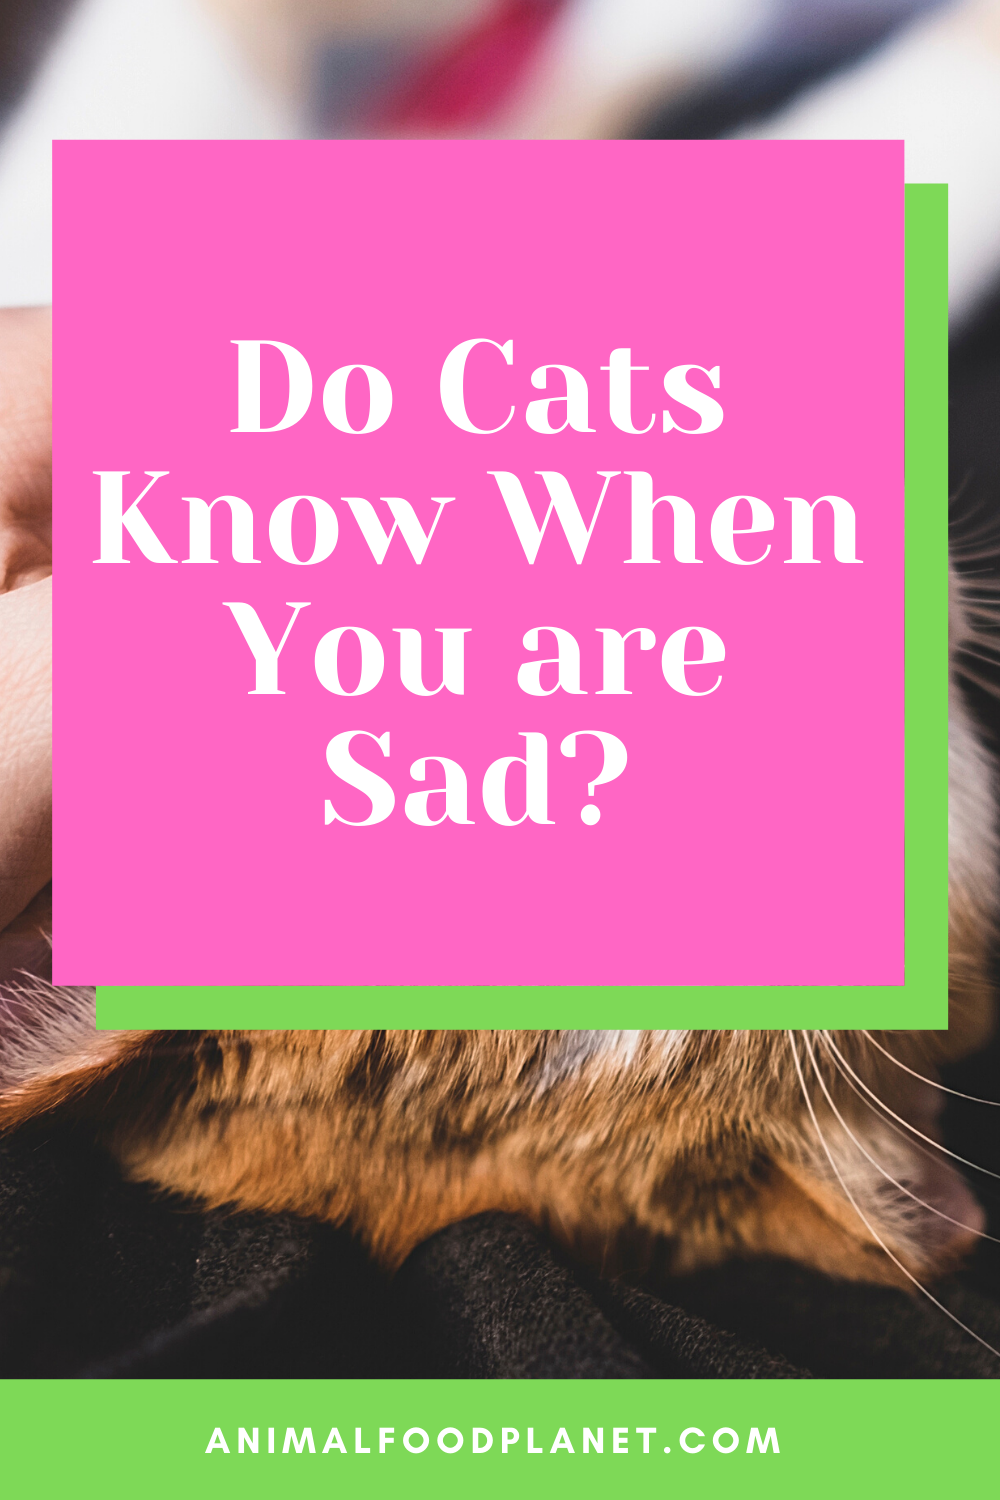 Do Cats Know When You are Sad